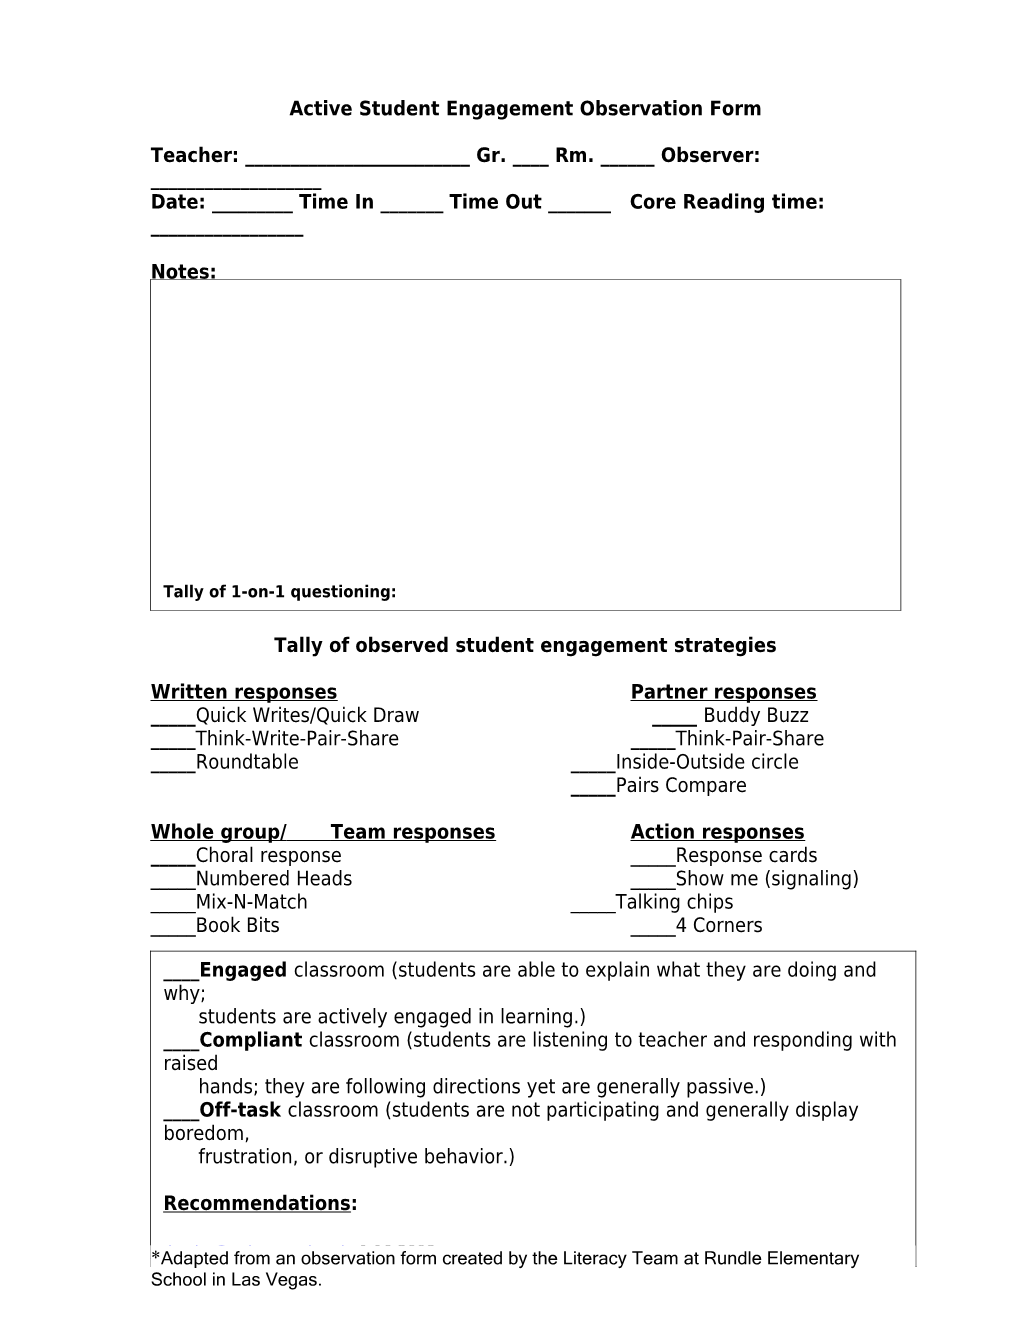 Active Student Learning Observation Form